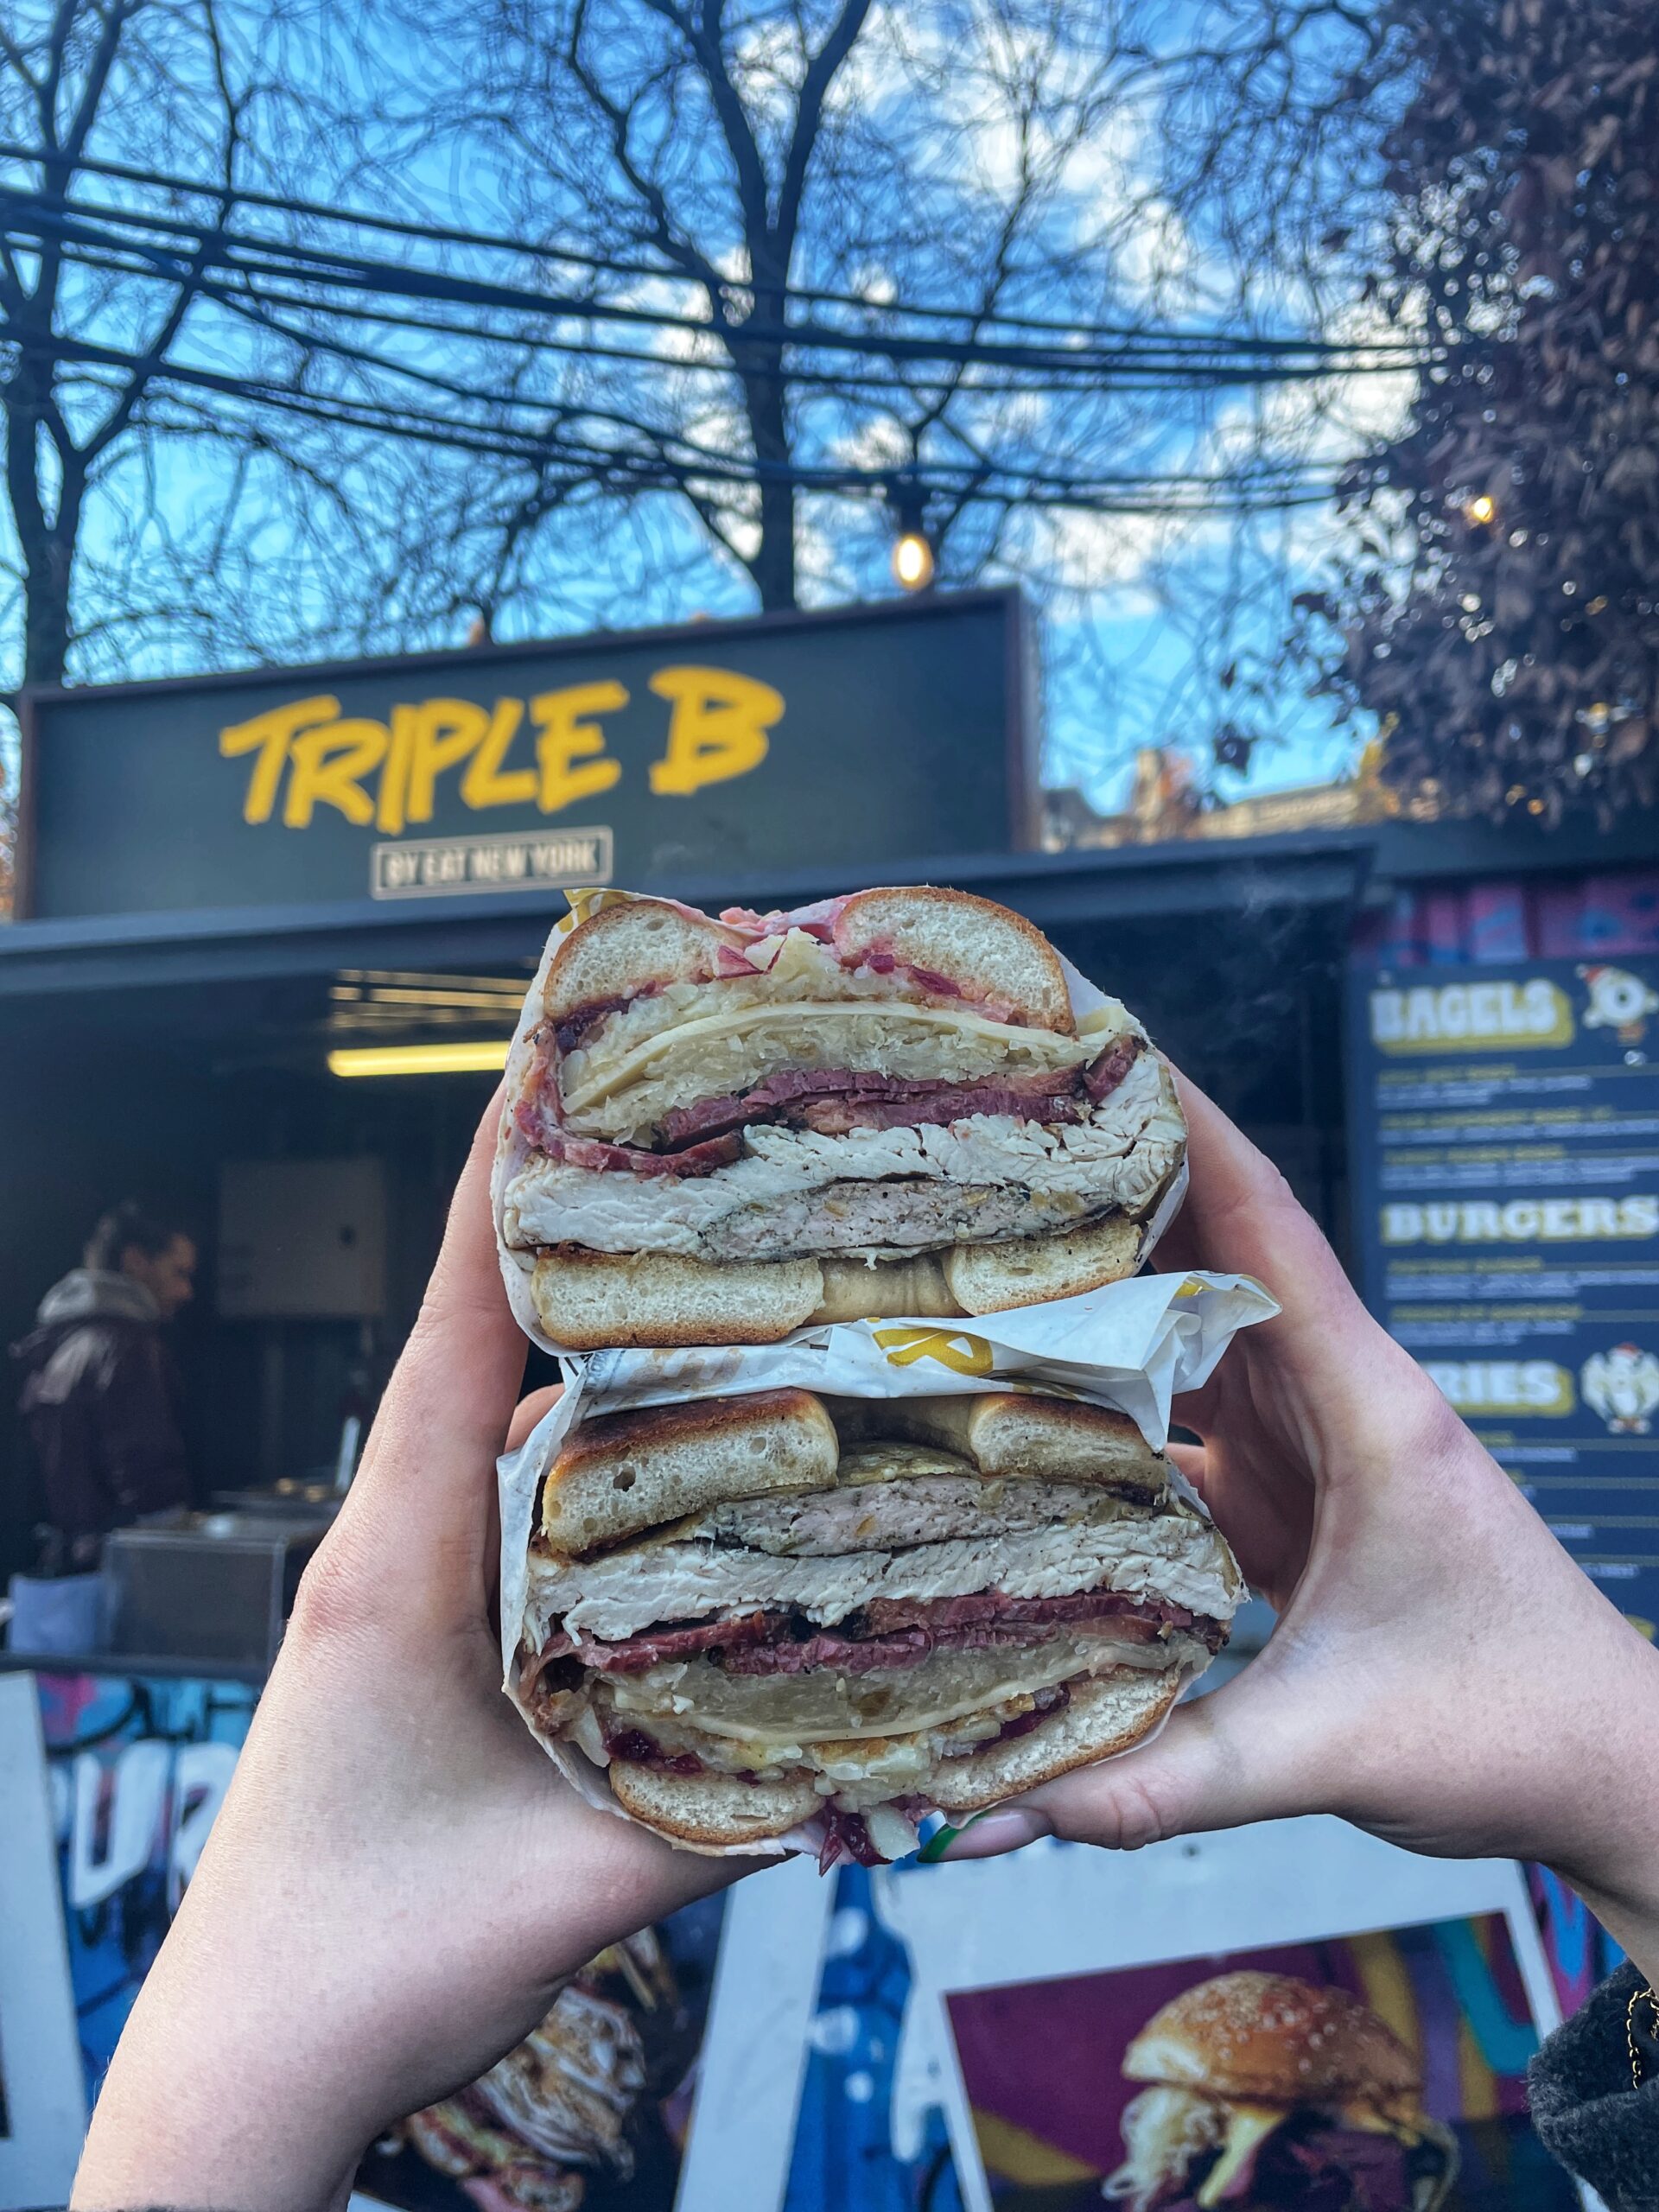 Triple B is a long-standing favourite at the Manchester Christmas Markets